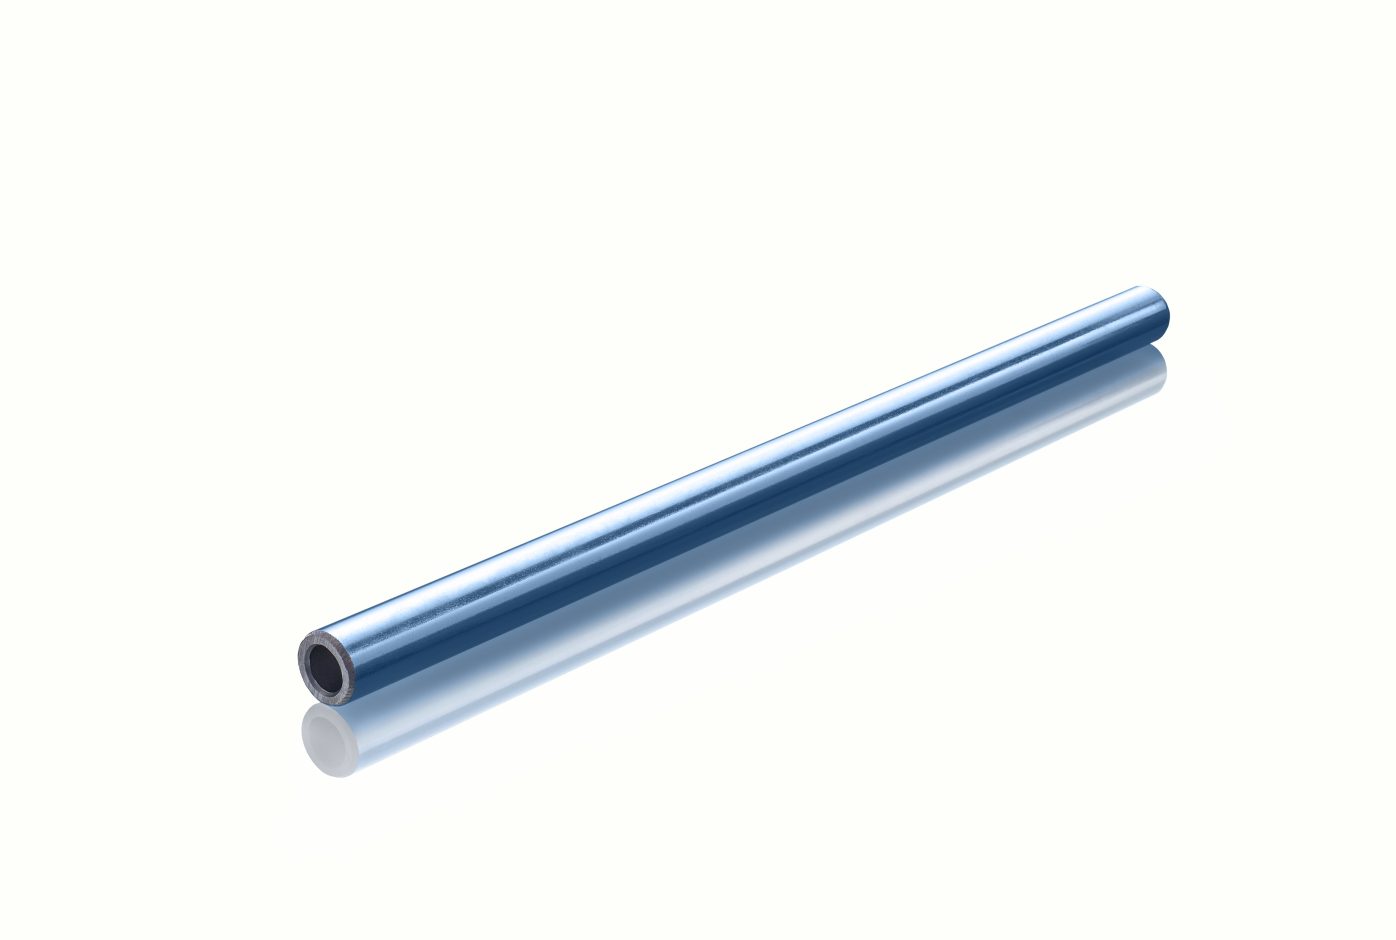 With PPH2, Poppe + Potthoff supplies a material specially developed for use in hydrogen applications, e.g. for the production of lines with 700 bar pressure resistance. Source: Poppe + Potthoff